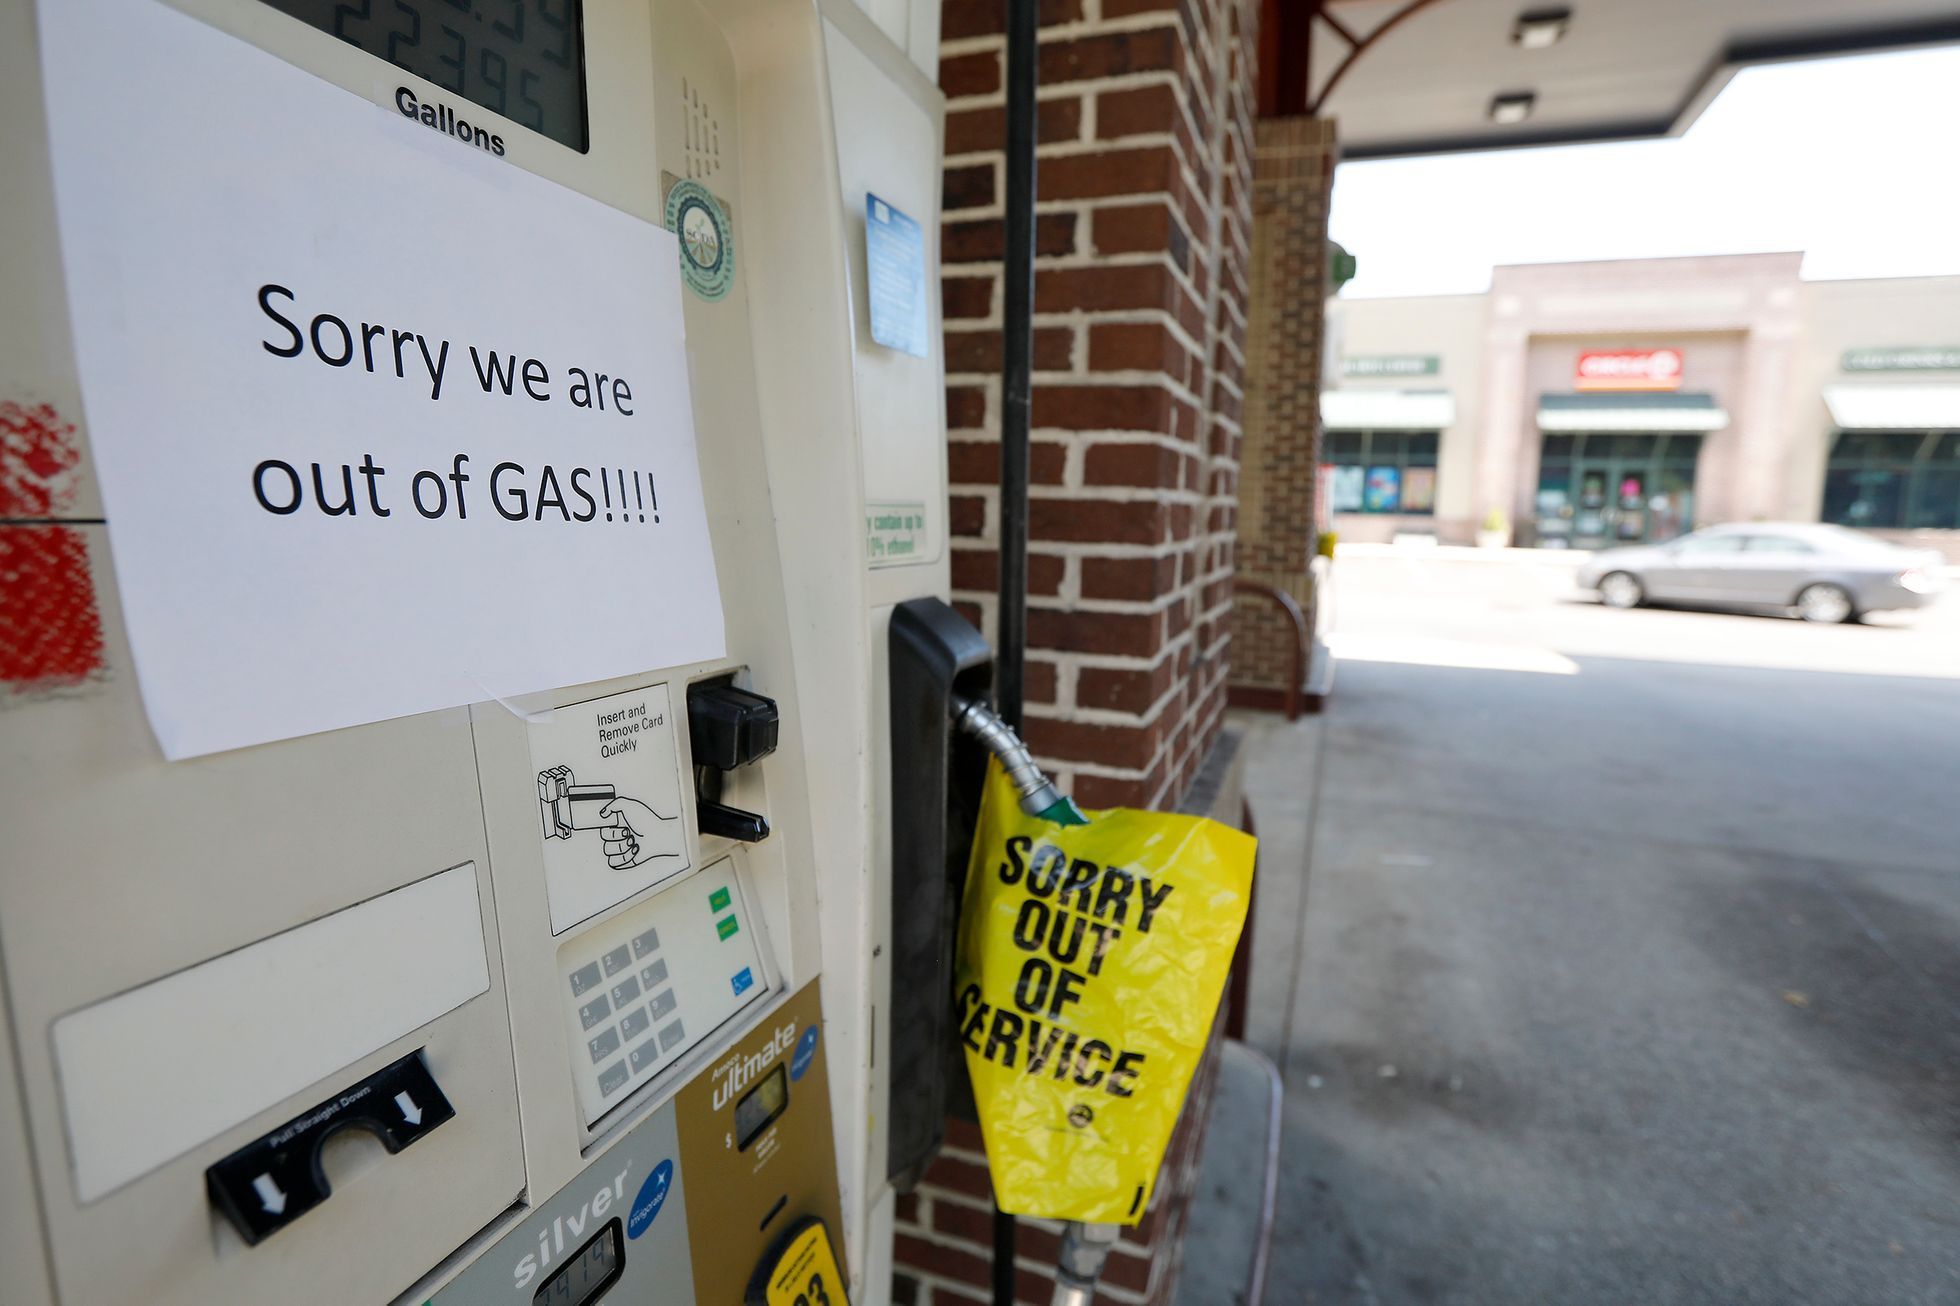 A gas station in Mt. Pleasant S.C. alerts motorist that it is out of gas due to the heavy demand caused by Hurricane Florence.